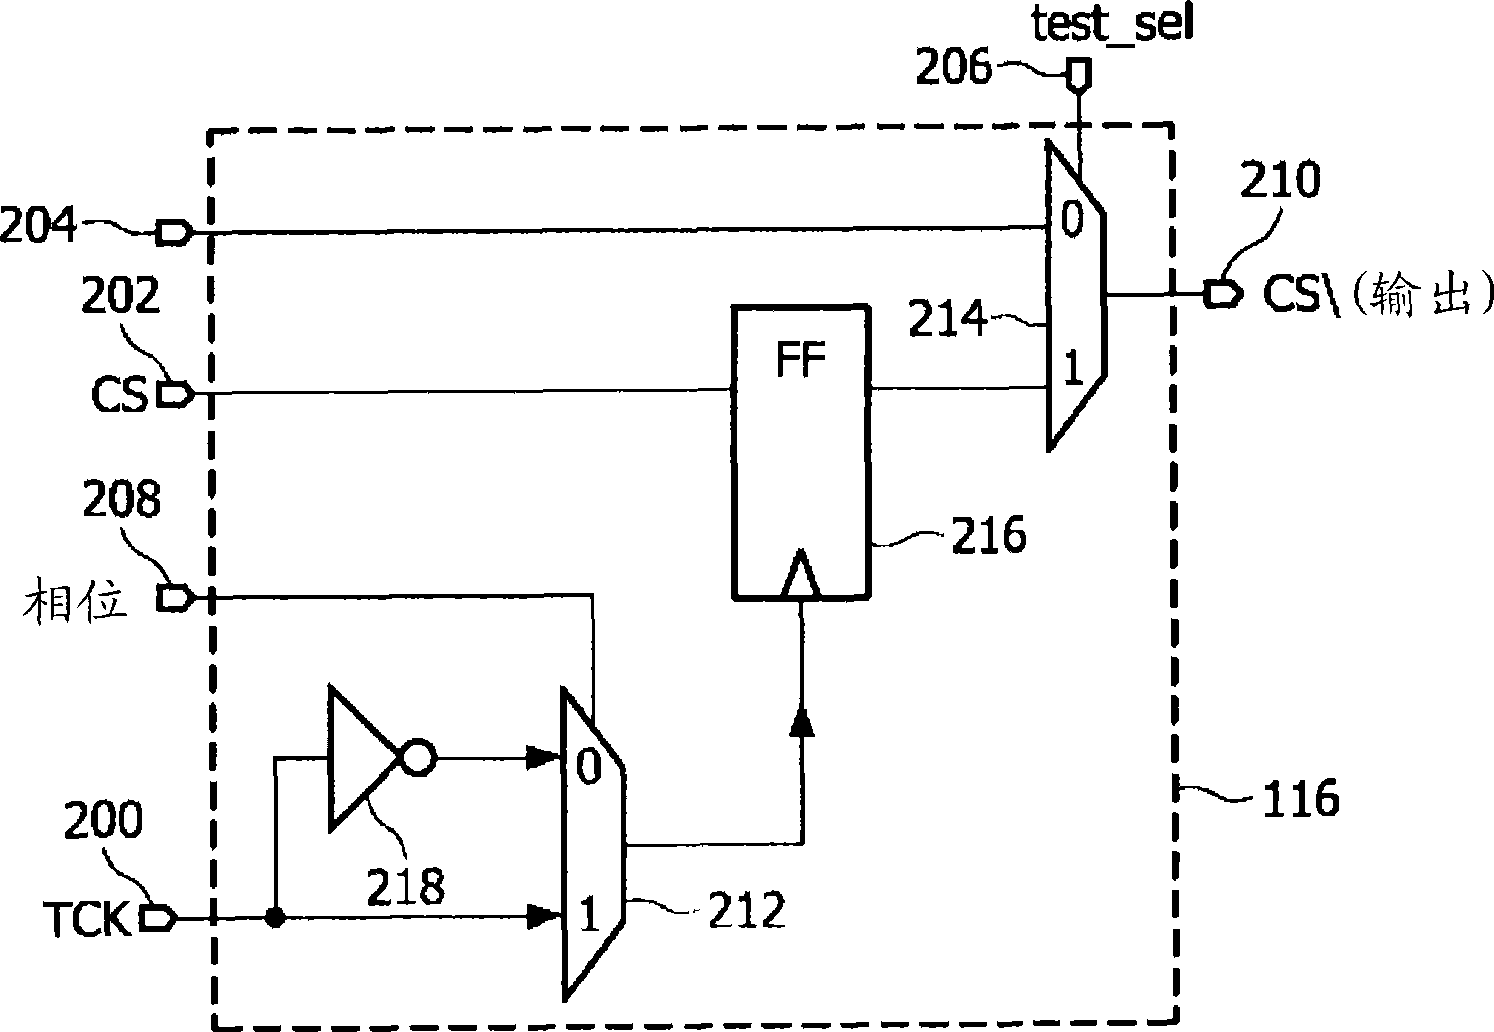 IC circuit with test access control circuit using a JTAG interface